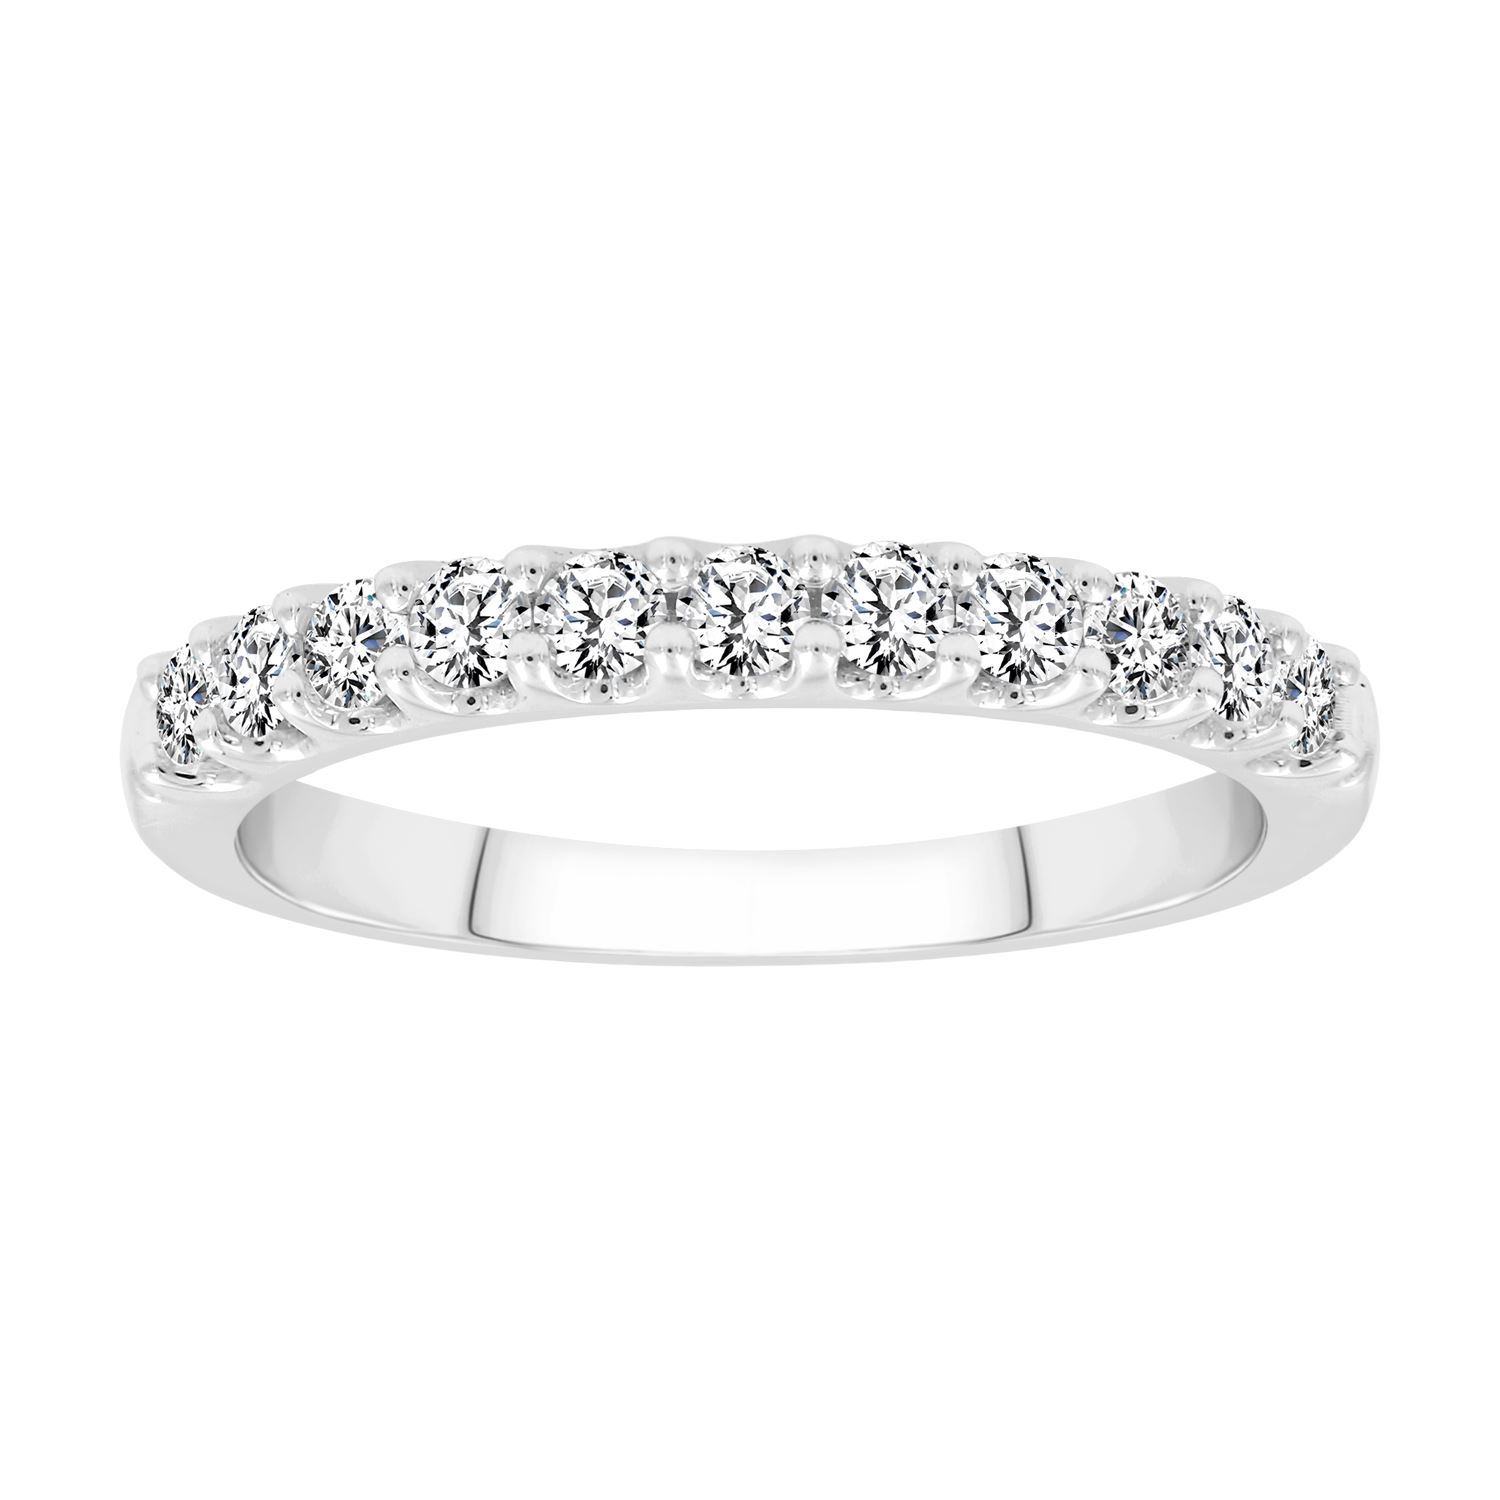 14K Solid White Gold Womens Two Row Diamond Wedding Ring Band 1.35 Ctw –  Avianne Jewelers